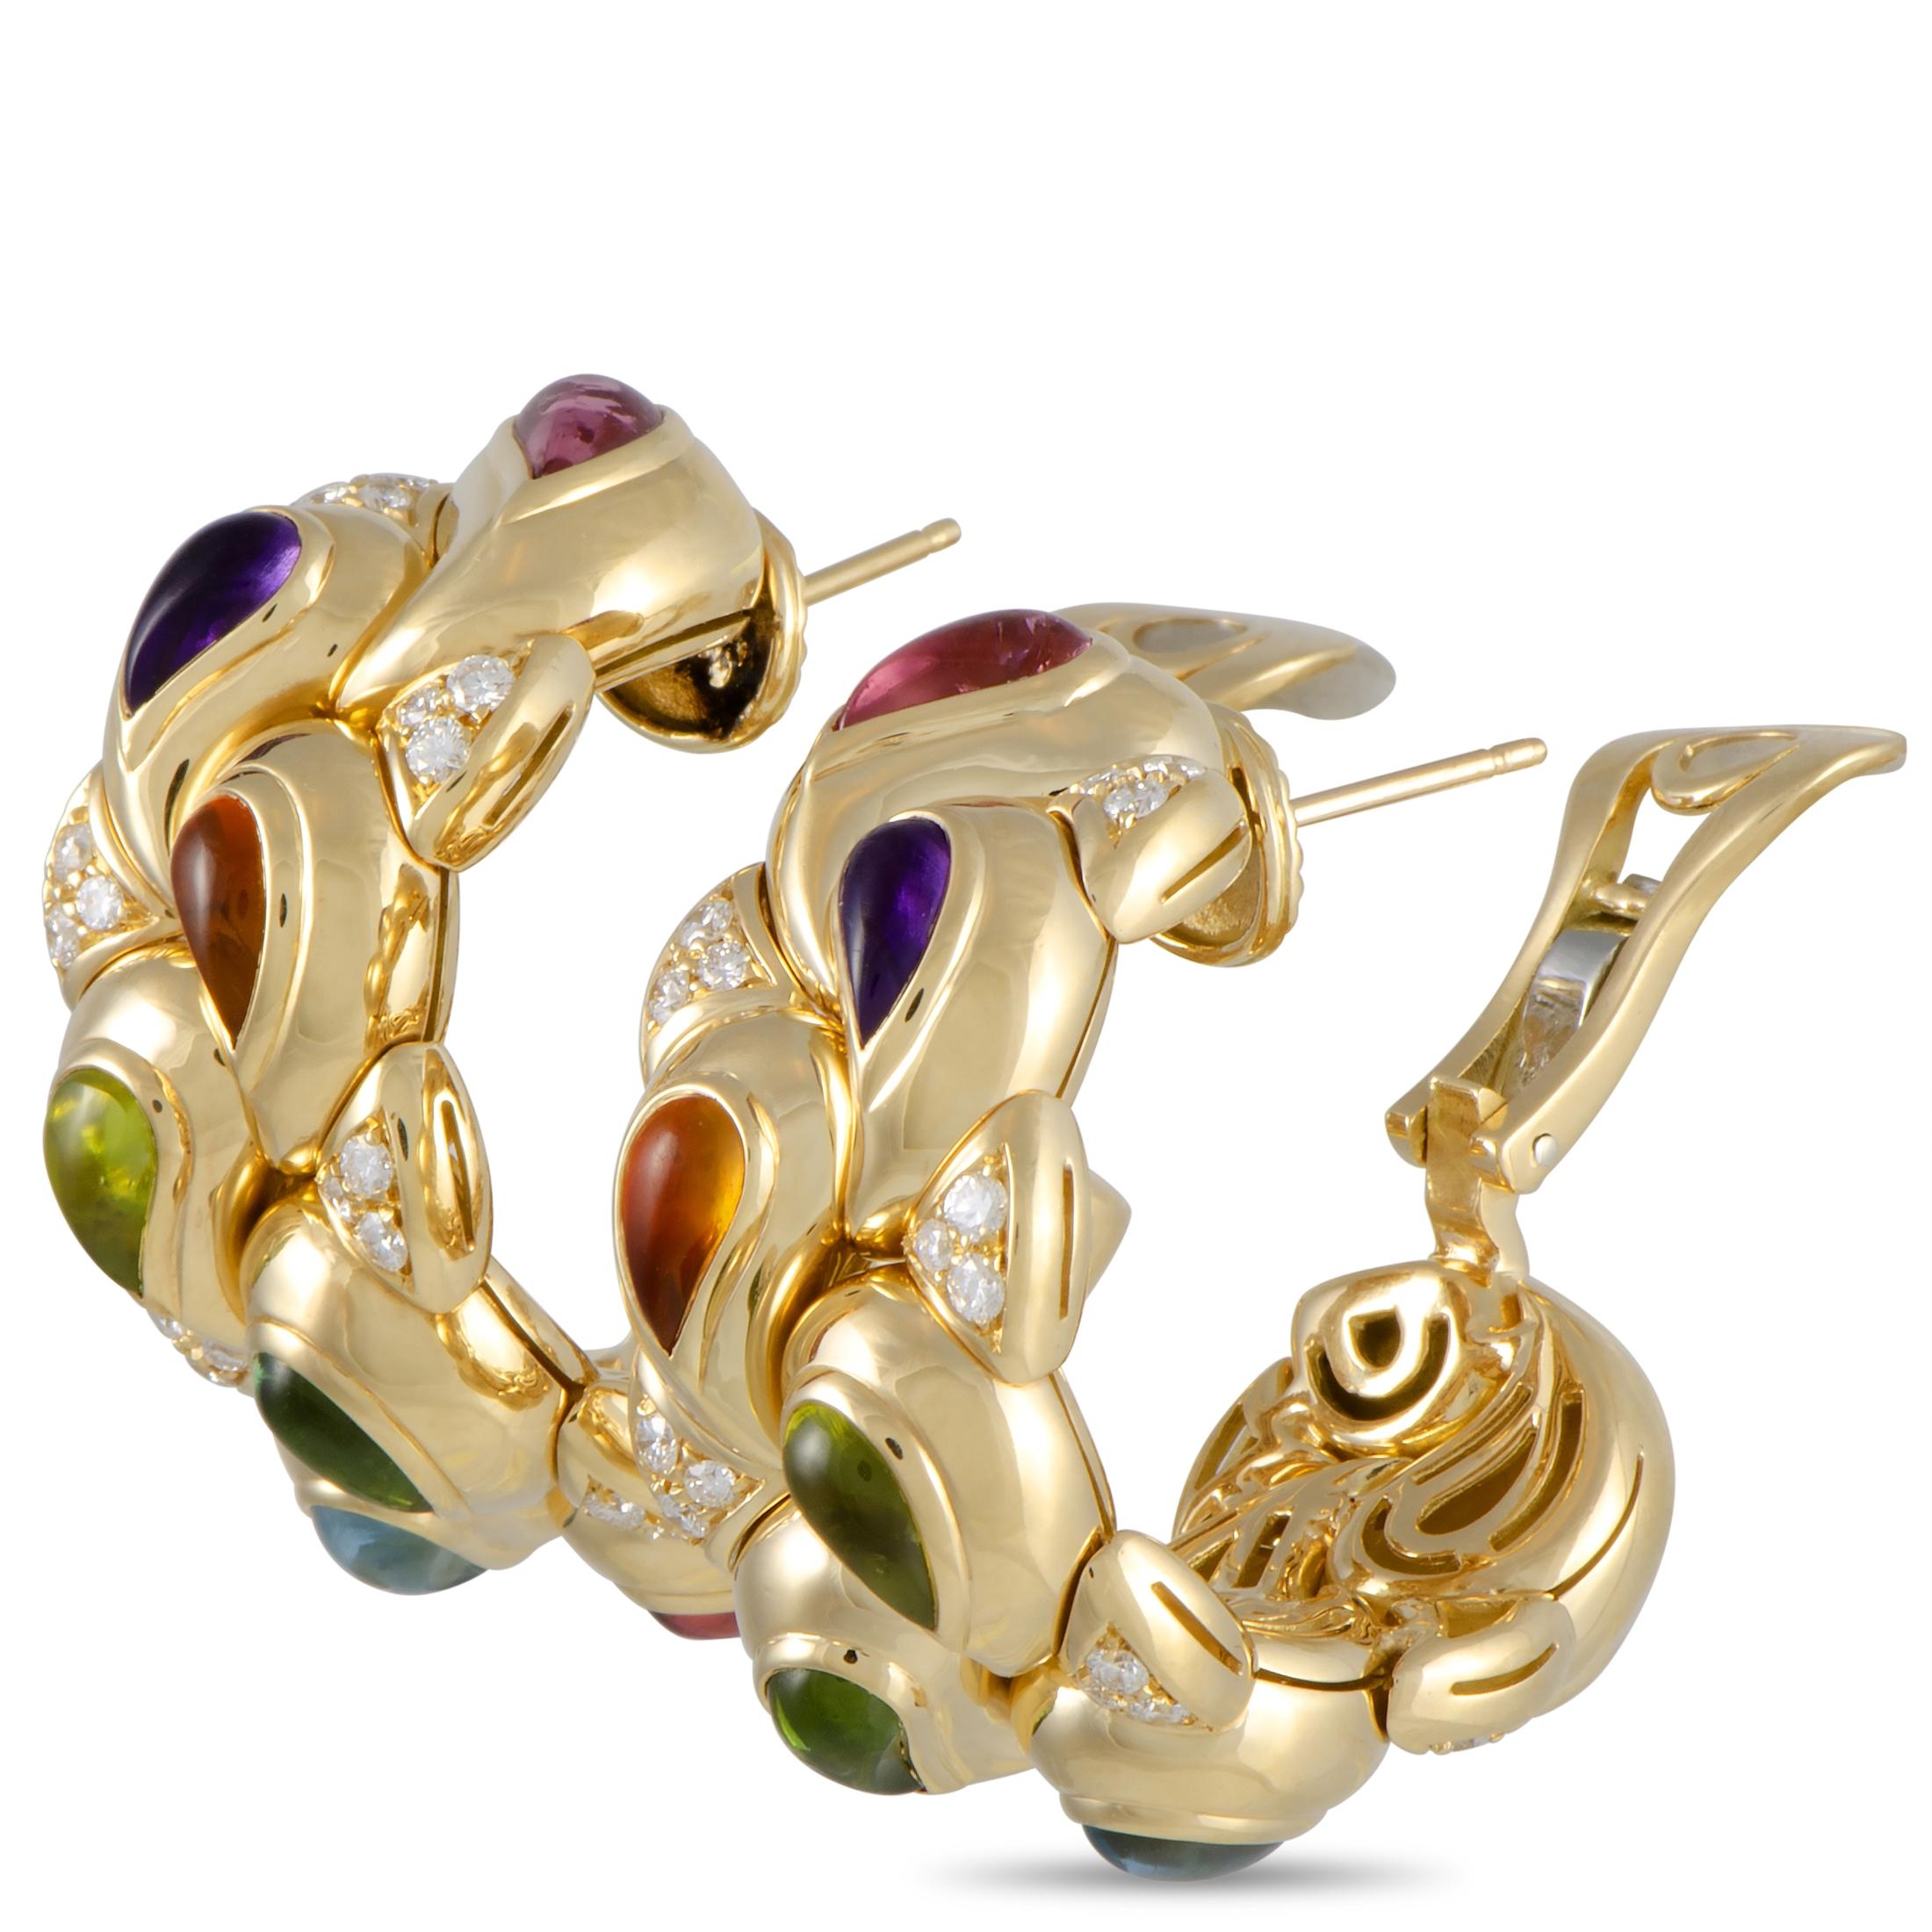 The Chopard “Casmir” earrings are crafted from 18K yellow gold and set with citrine, peridot, tourmaline, amethyst, and topaz stones, and with a total of 1.20 carats of diamonds. The earrings measure 1.50” in length and 0.60” in width and each of